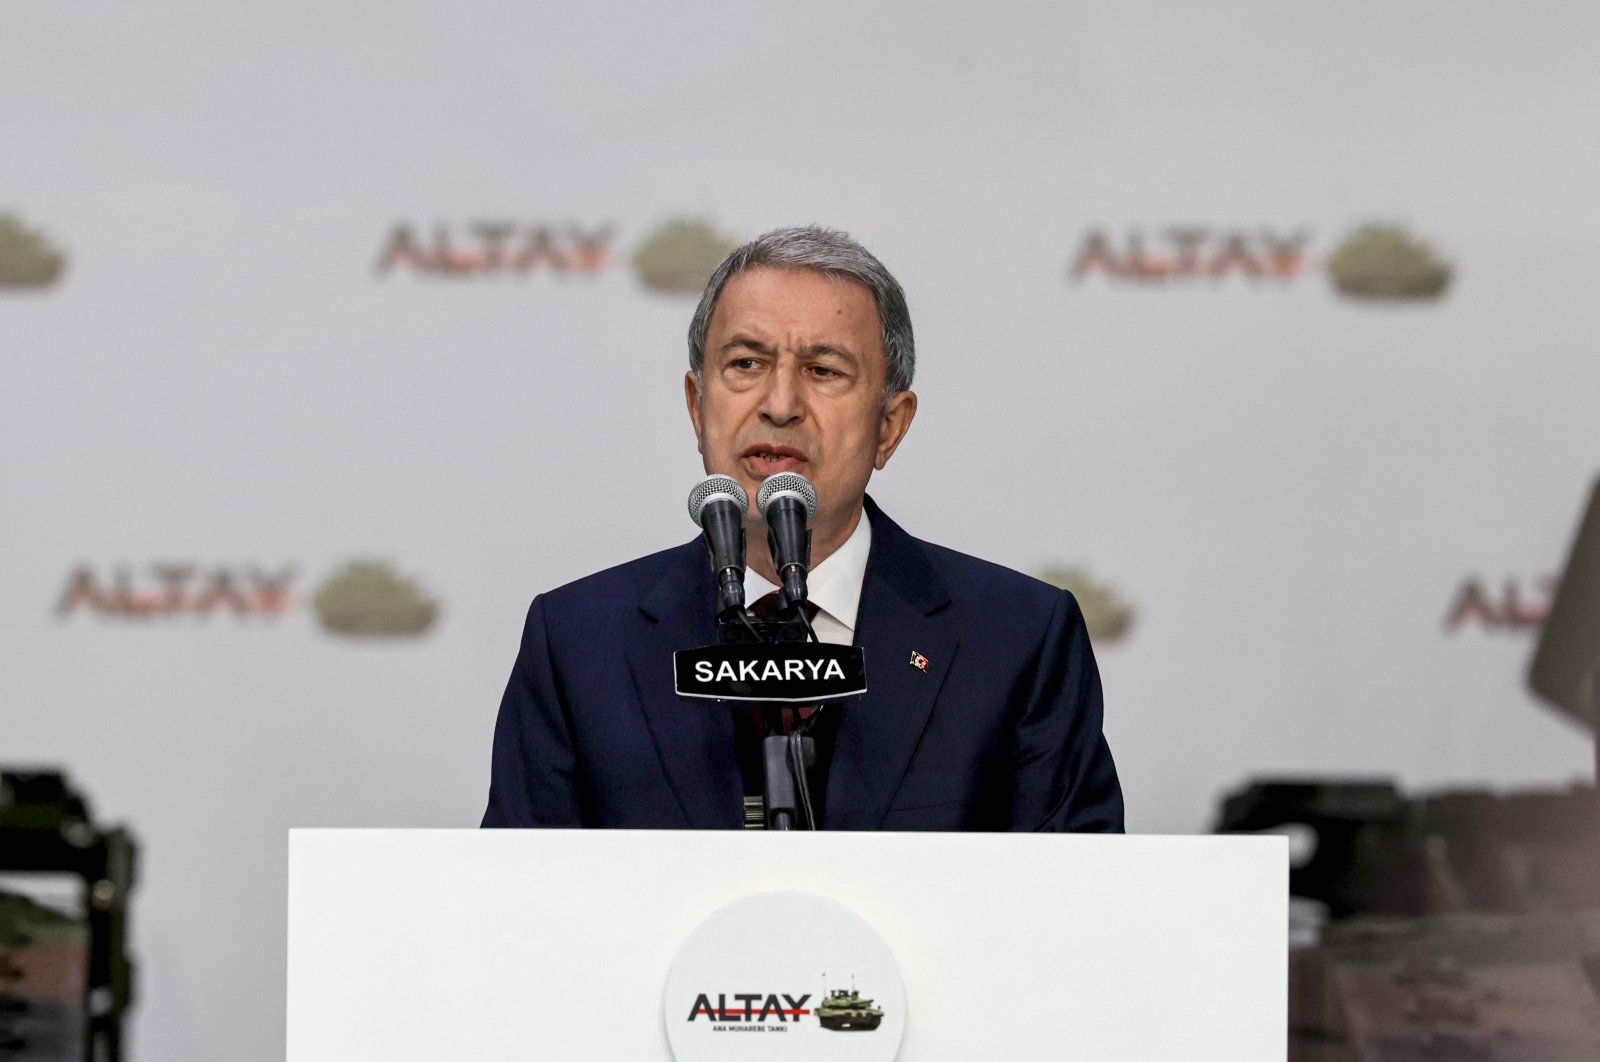 Defense Minister Hulusi Akar speaks at the delivery ceremony of new Altay tanks to the Turkish Armed Forces for tests in the northwestern Sakarya province, Türkiye, April 23, 2023 (AA Photo)